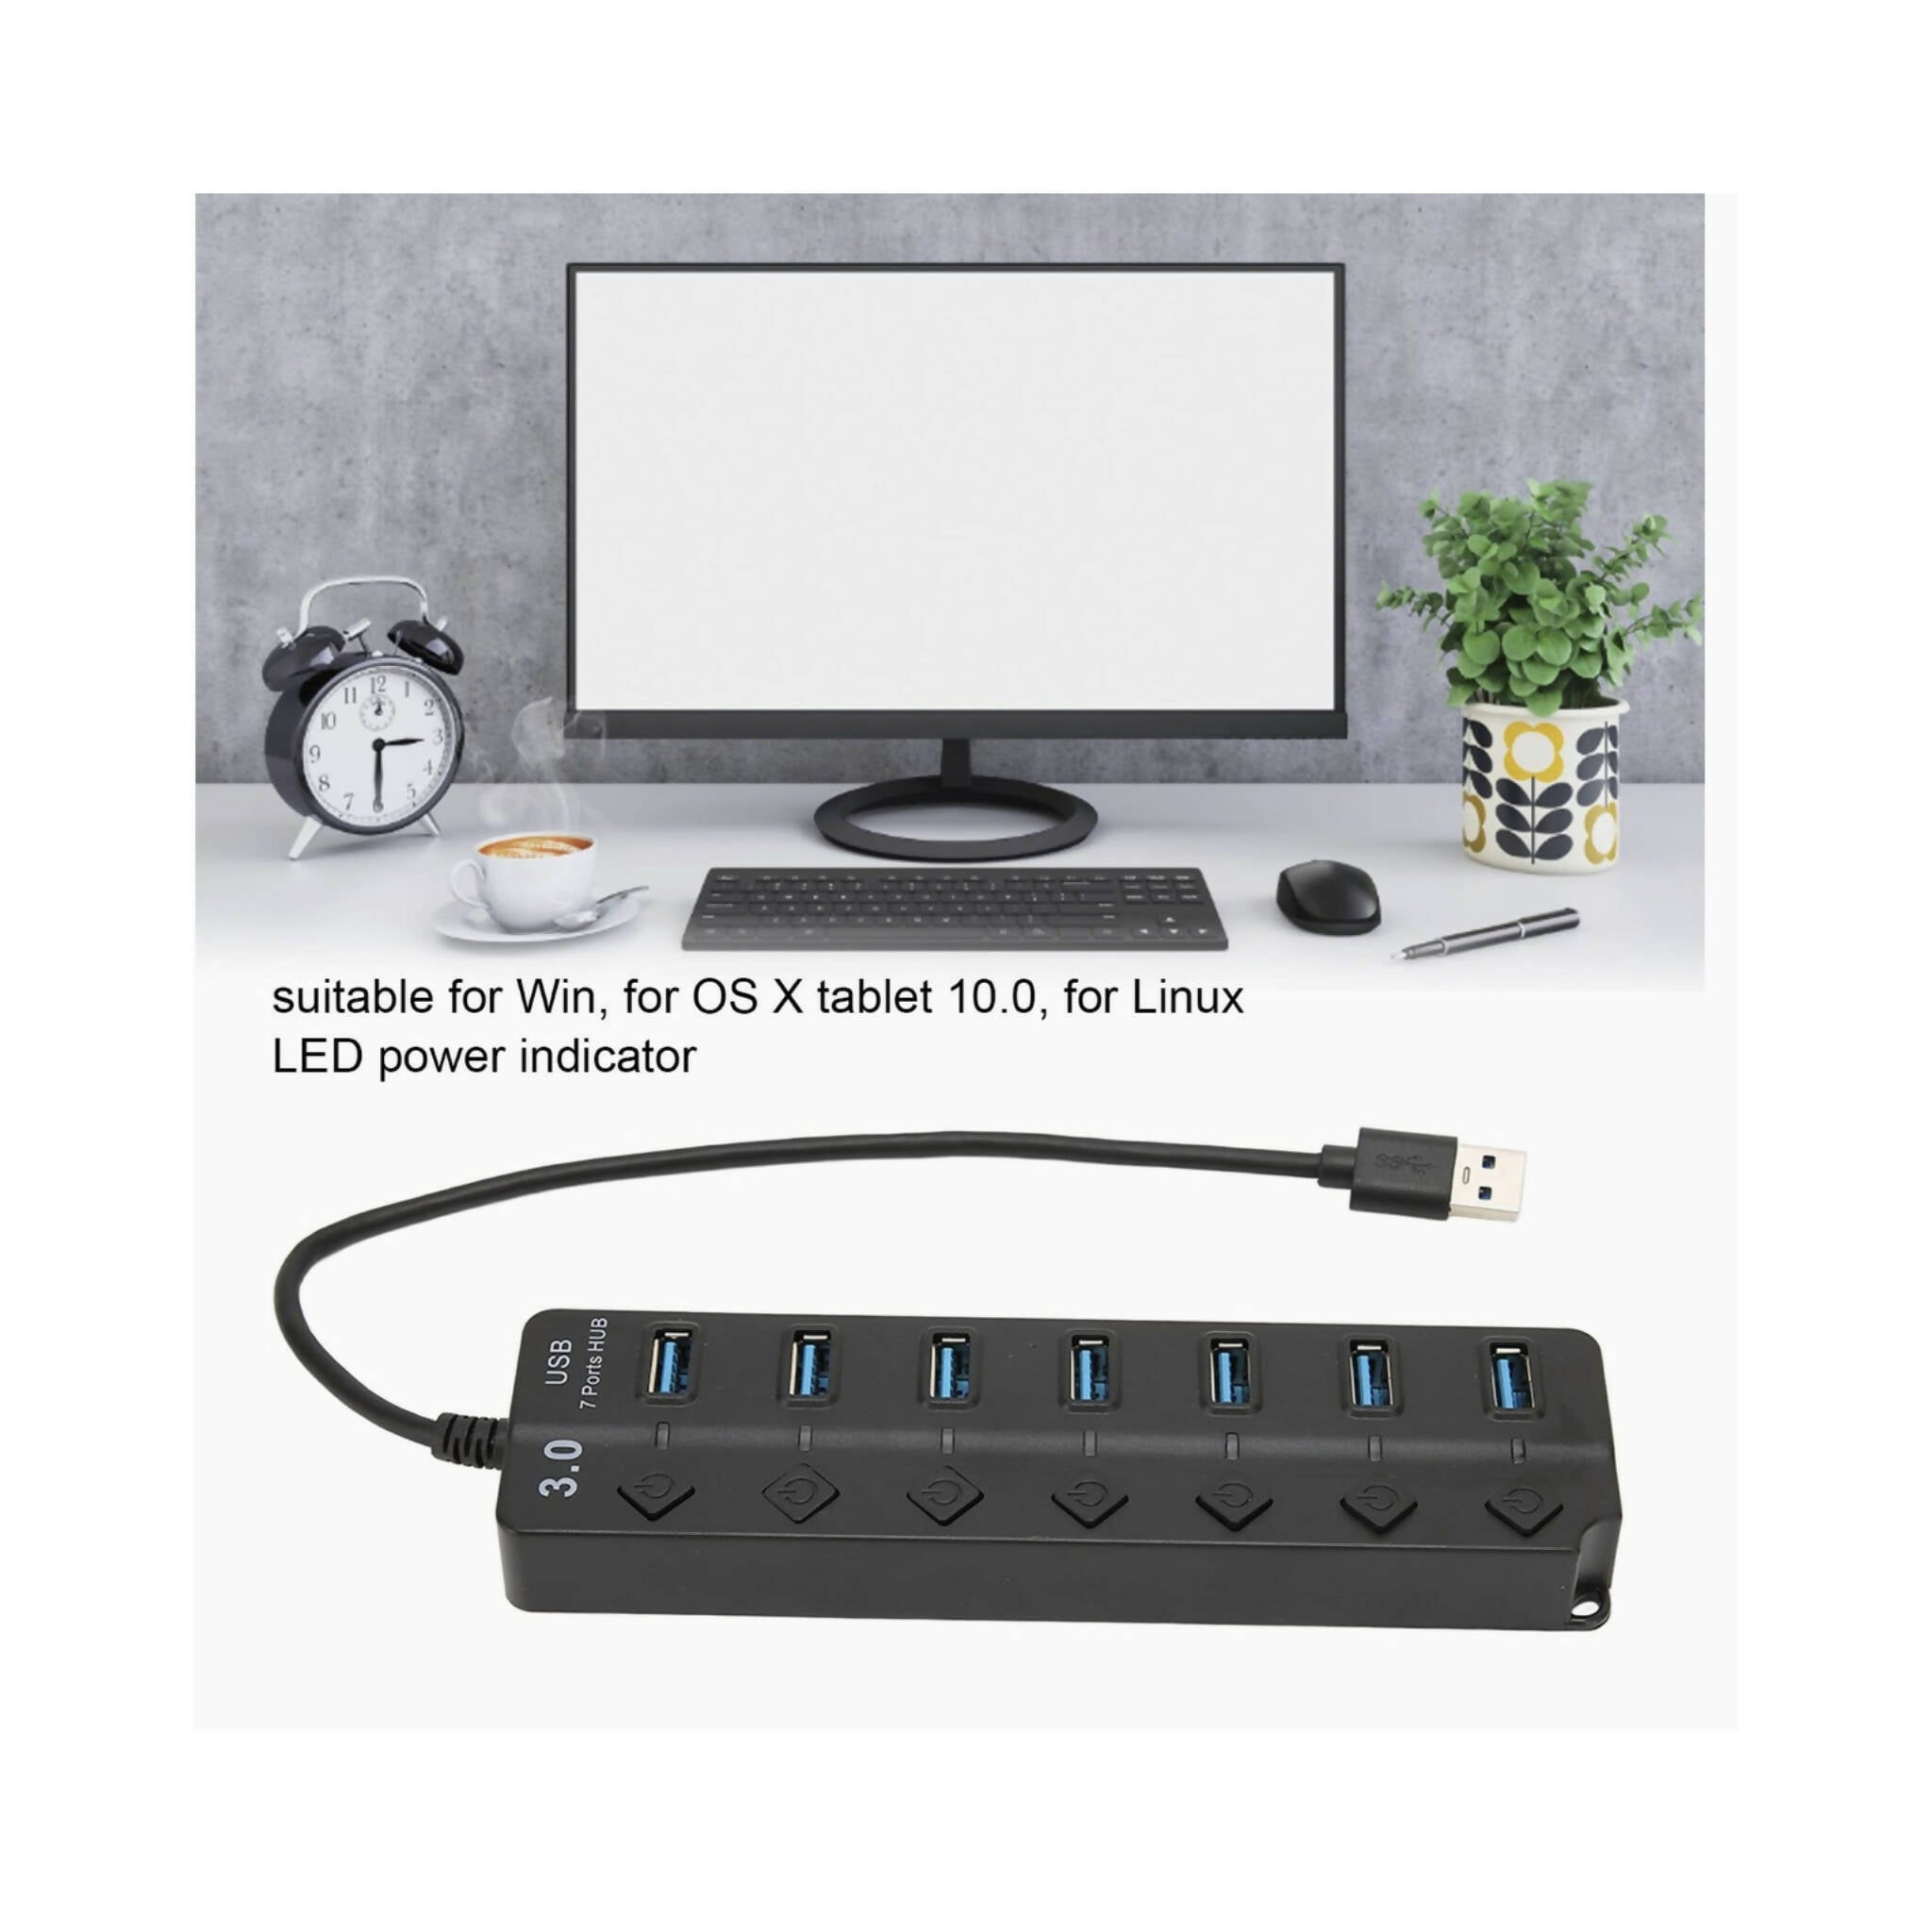 Adapter, High-Speed USB3.0 Hub, Plug and Play, Current Protection